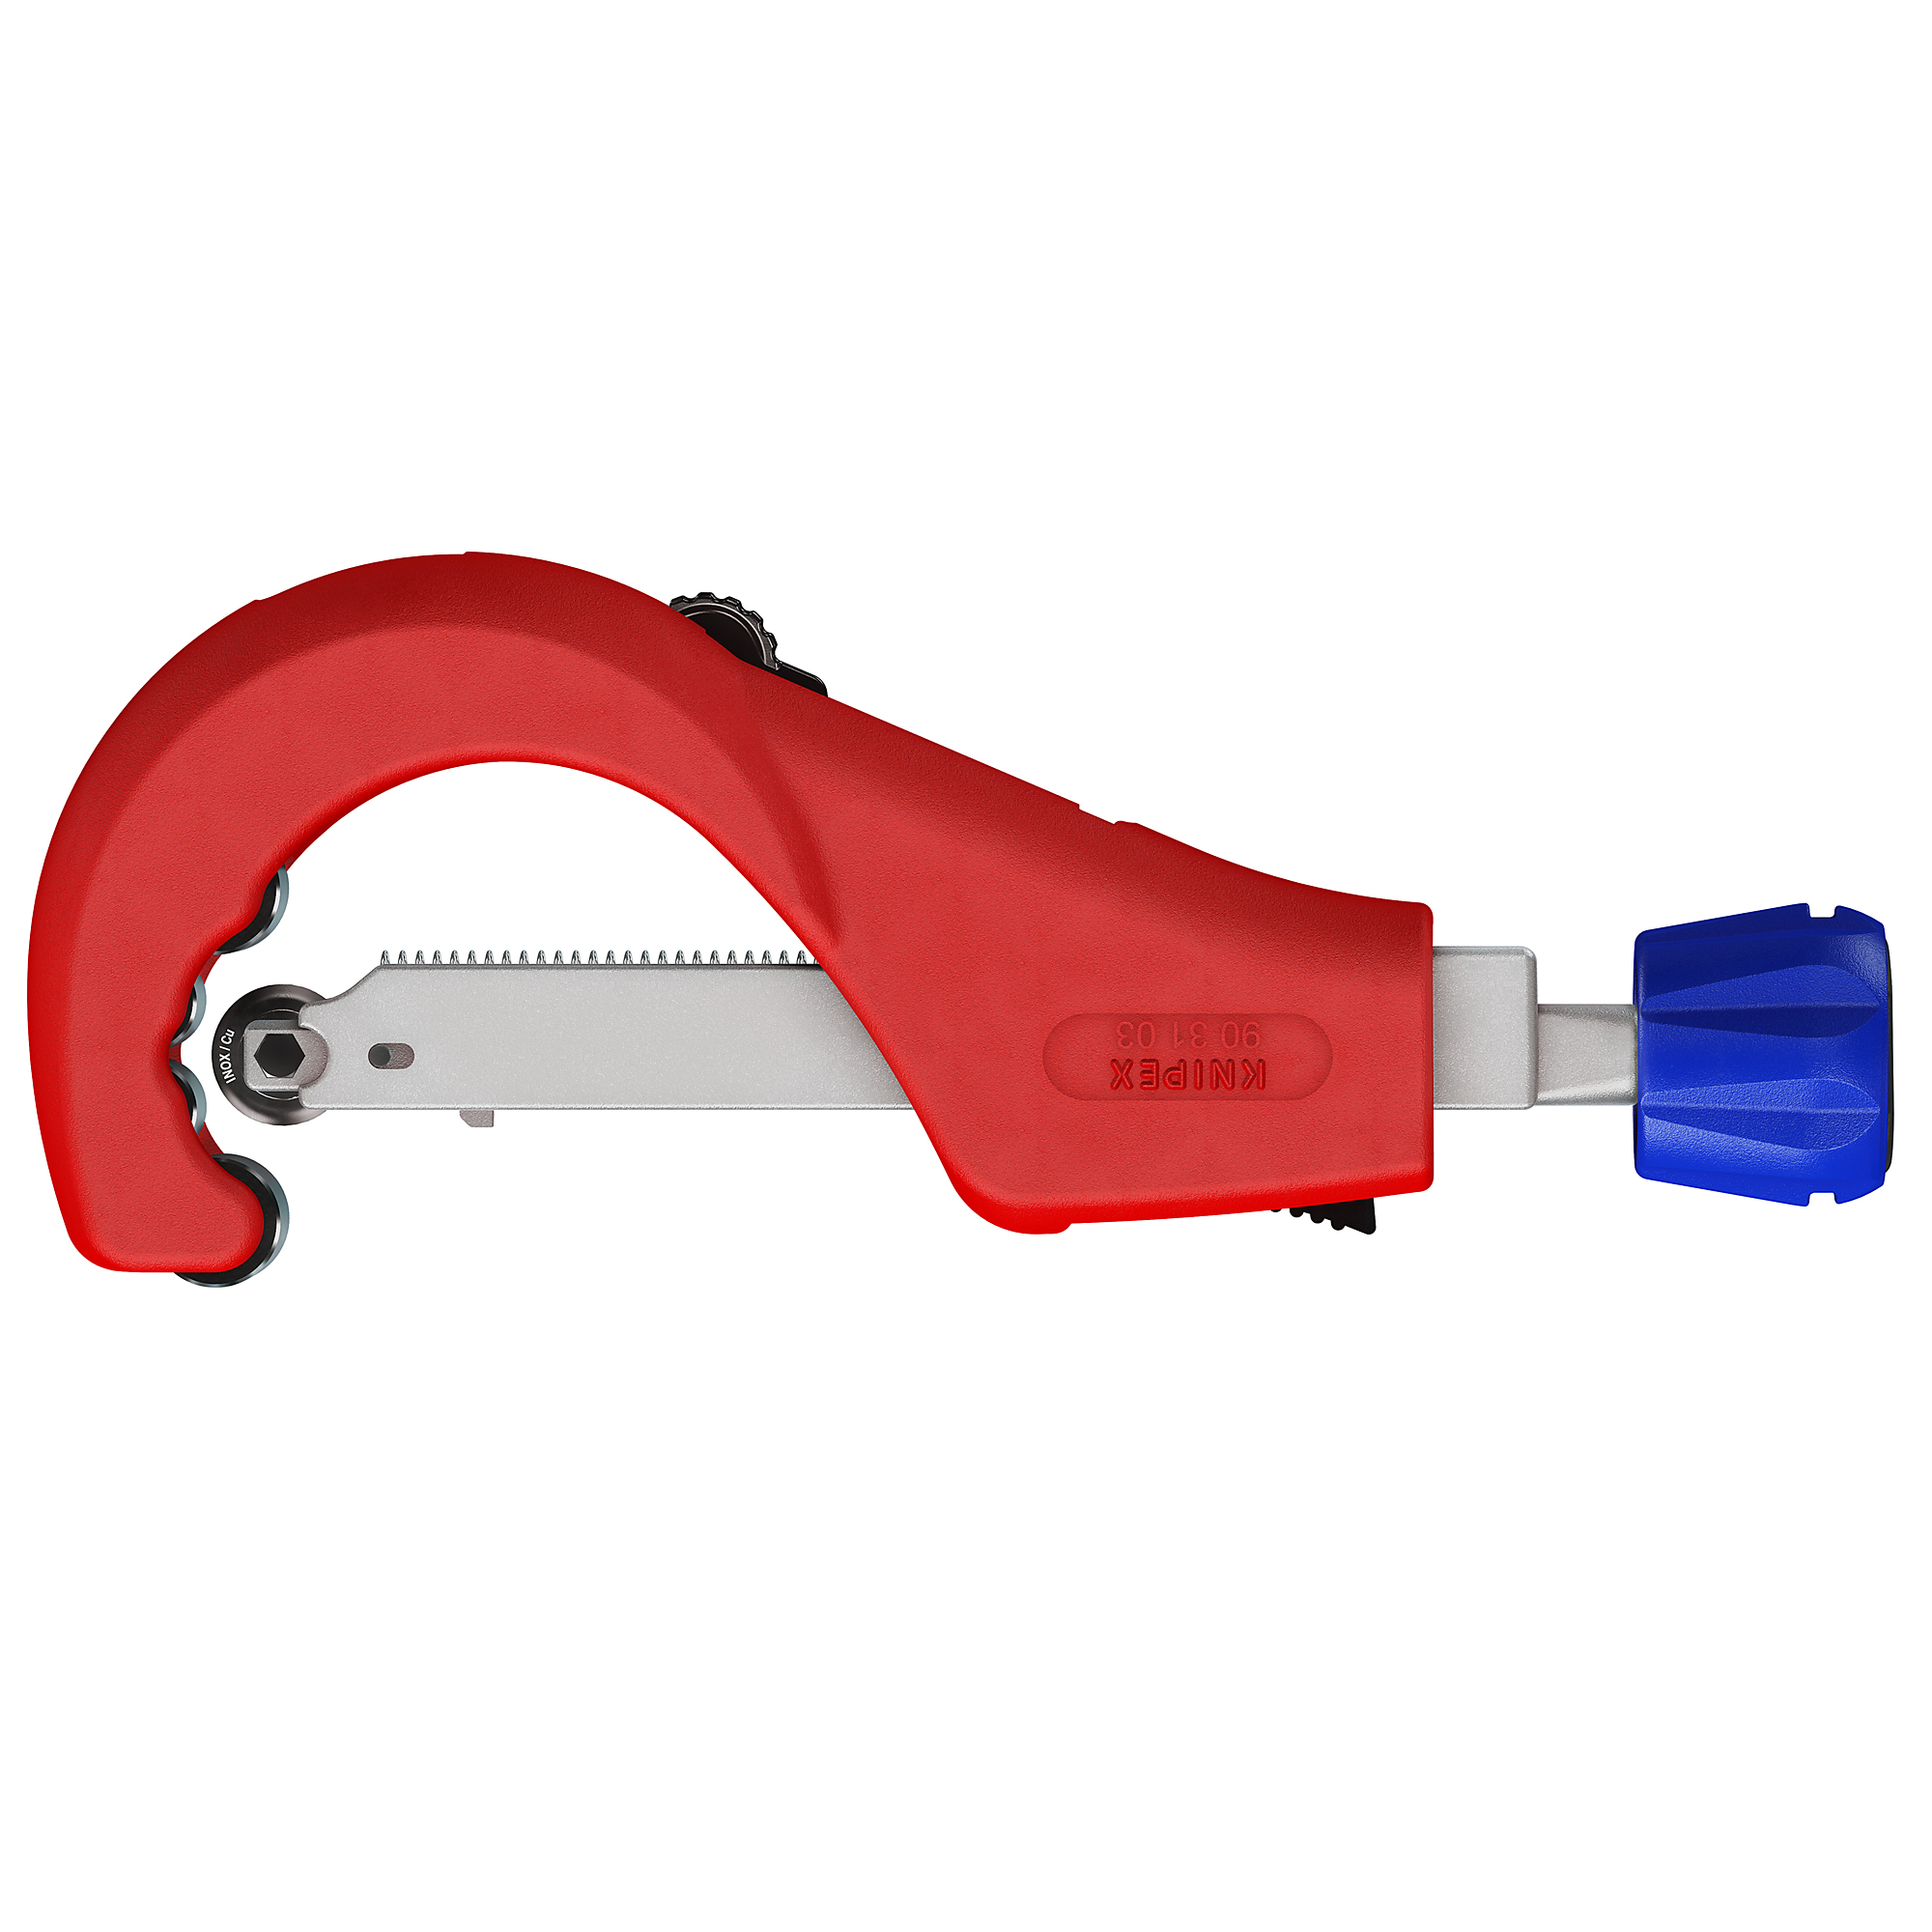 KNIPEX TubiX , KNIPEX TubiX XL Pipe Cutter, 10.25Inch, Max. Diameter 3 in, Blade Material Steel, Length 10.25 in, Model 90 31 03 BKA